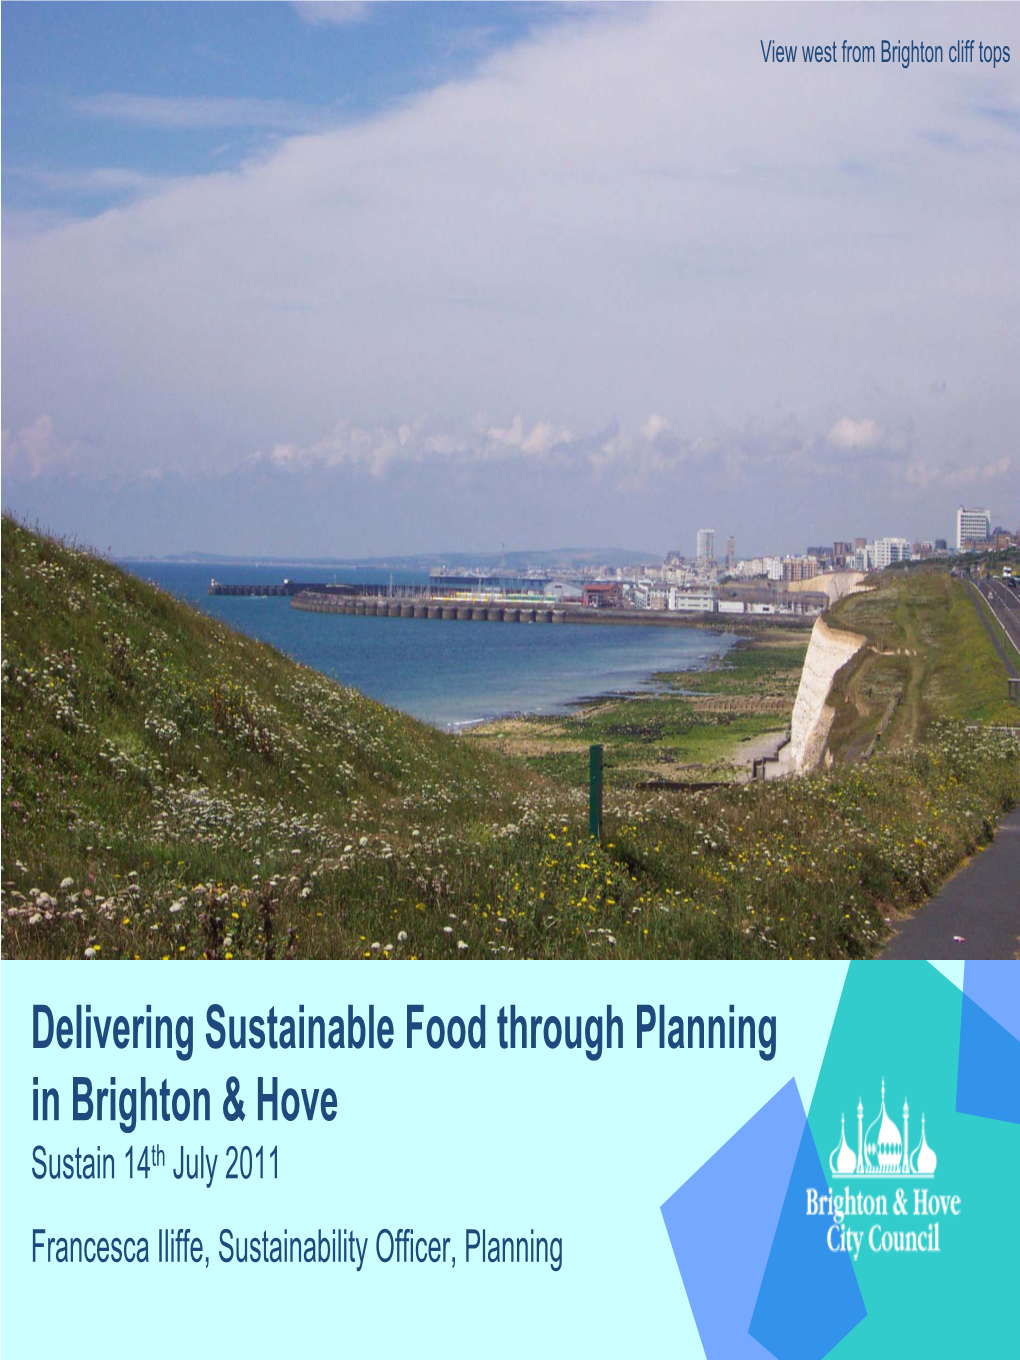 Planning and Food in Brighton & Hove